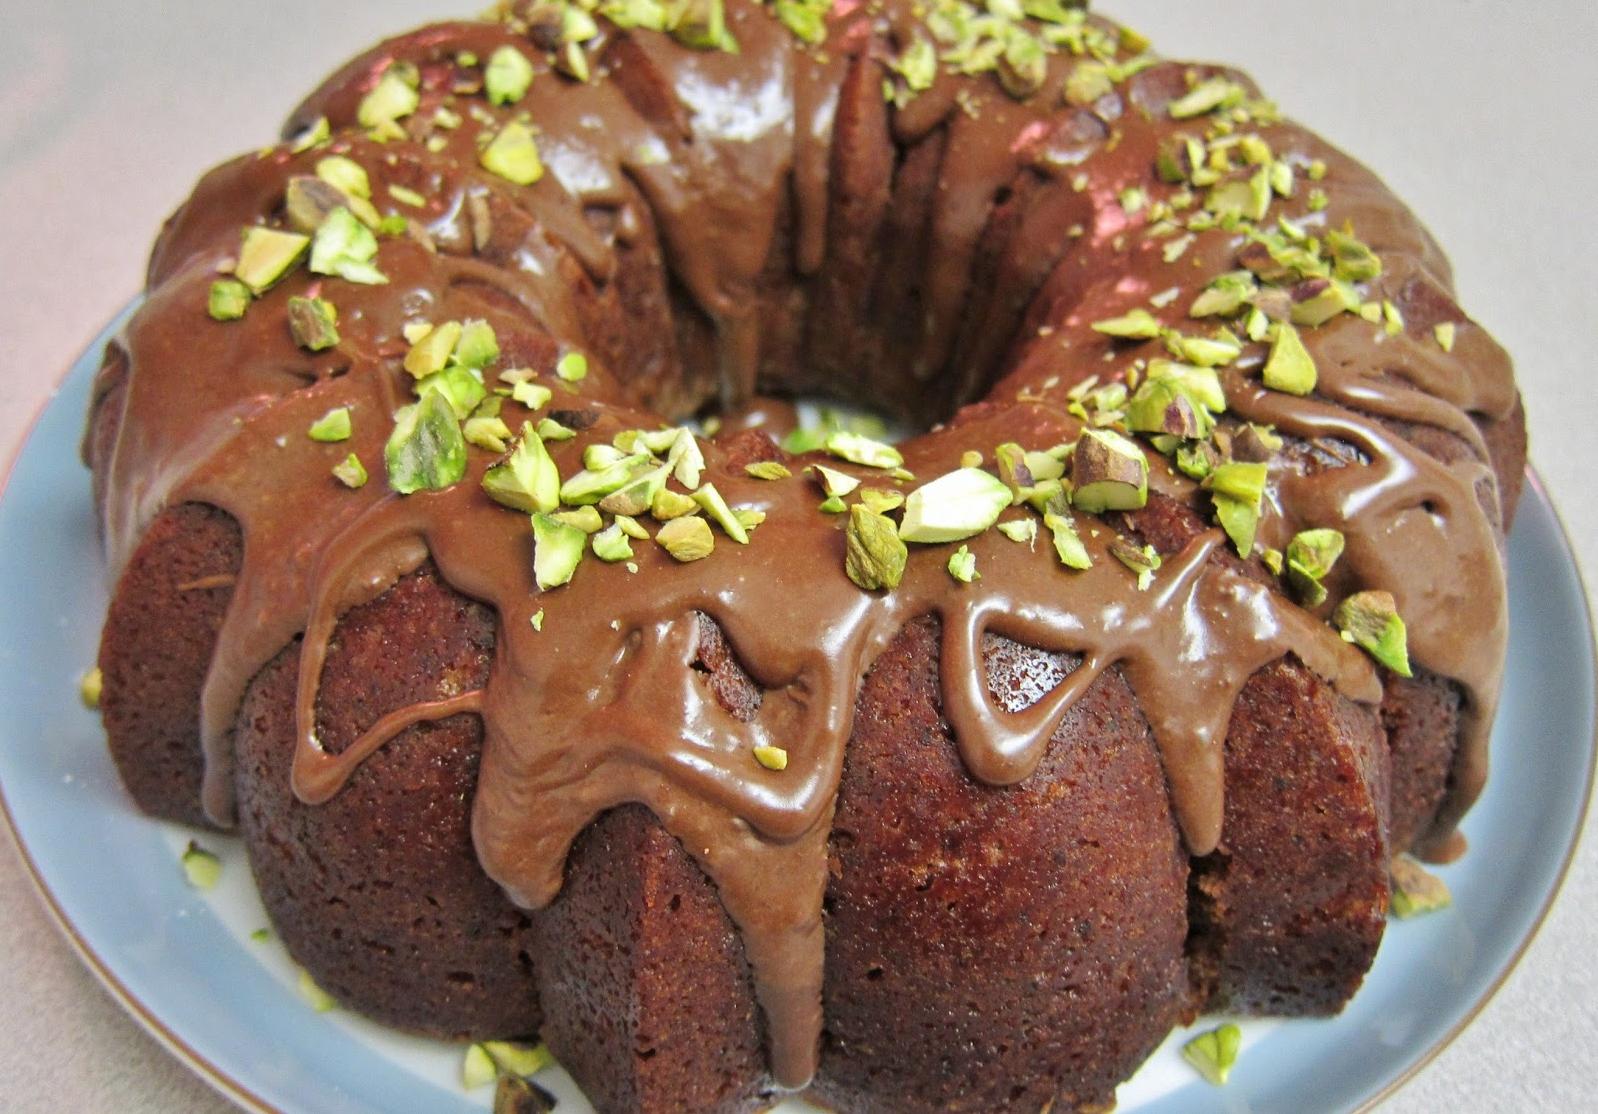  Indulge in the rich, velvety texture of this chocolate pound cake